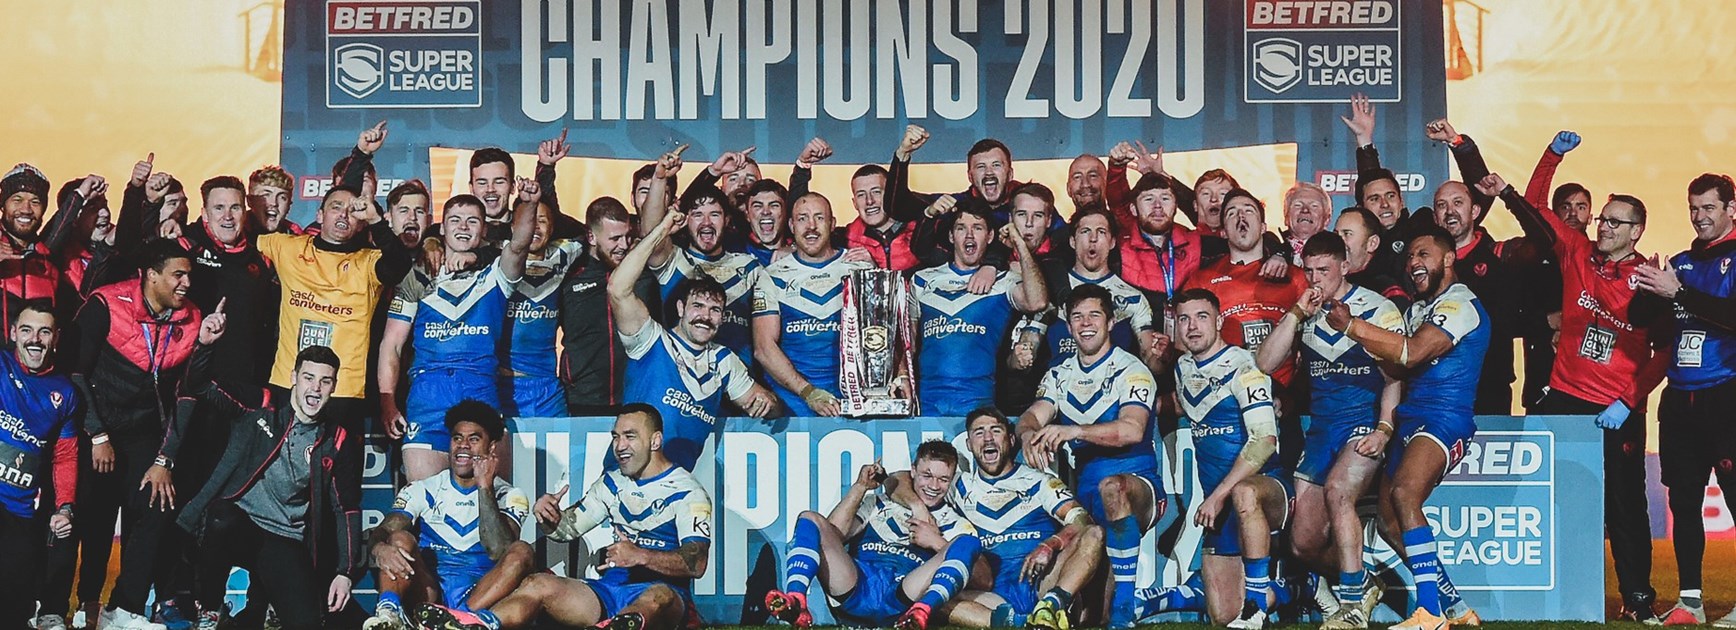 Fairytale end for Graham after stunning finish to Super League grand final